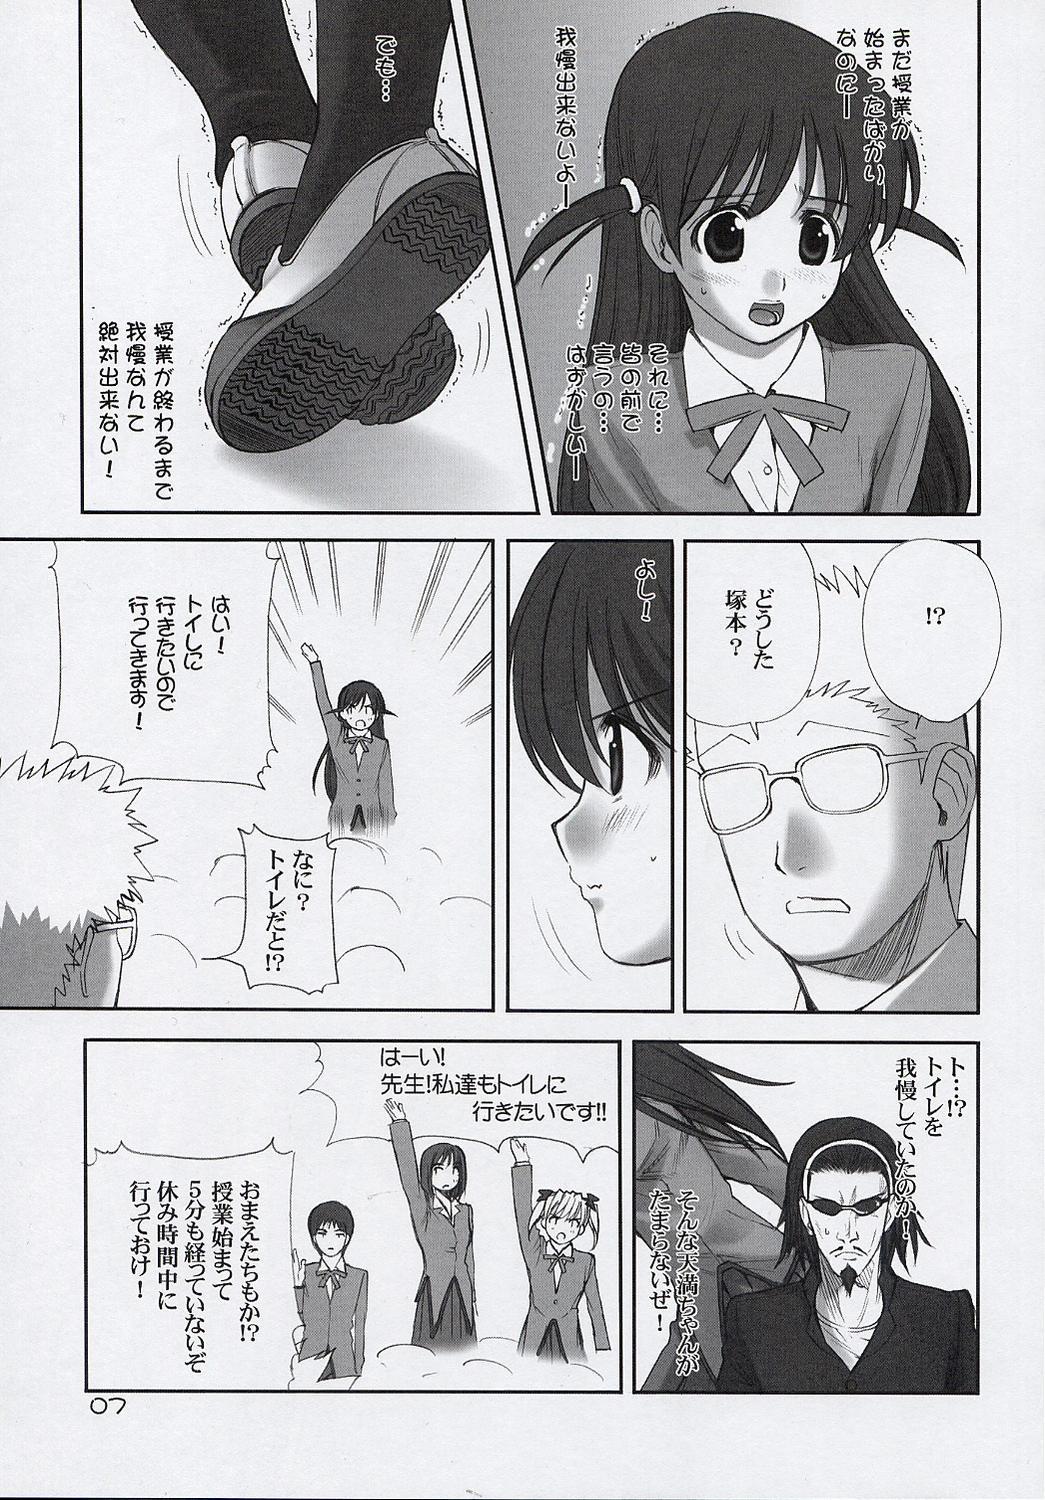 Perra Trouble You - School rumble Moms - Page 6